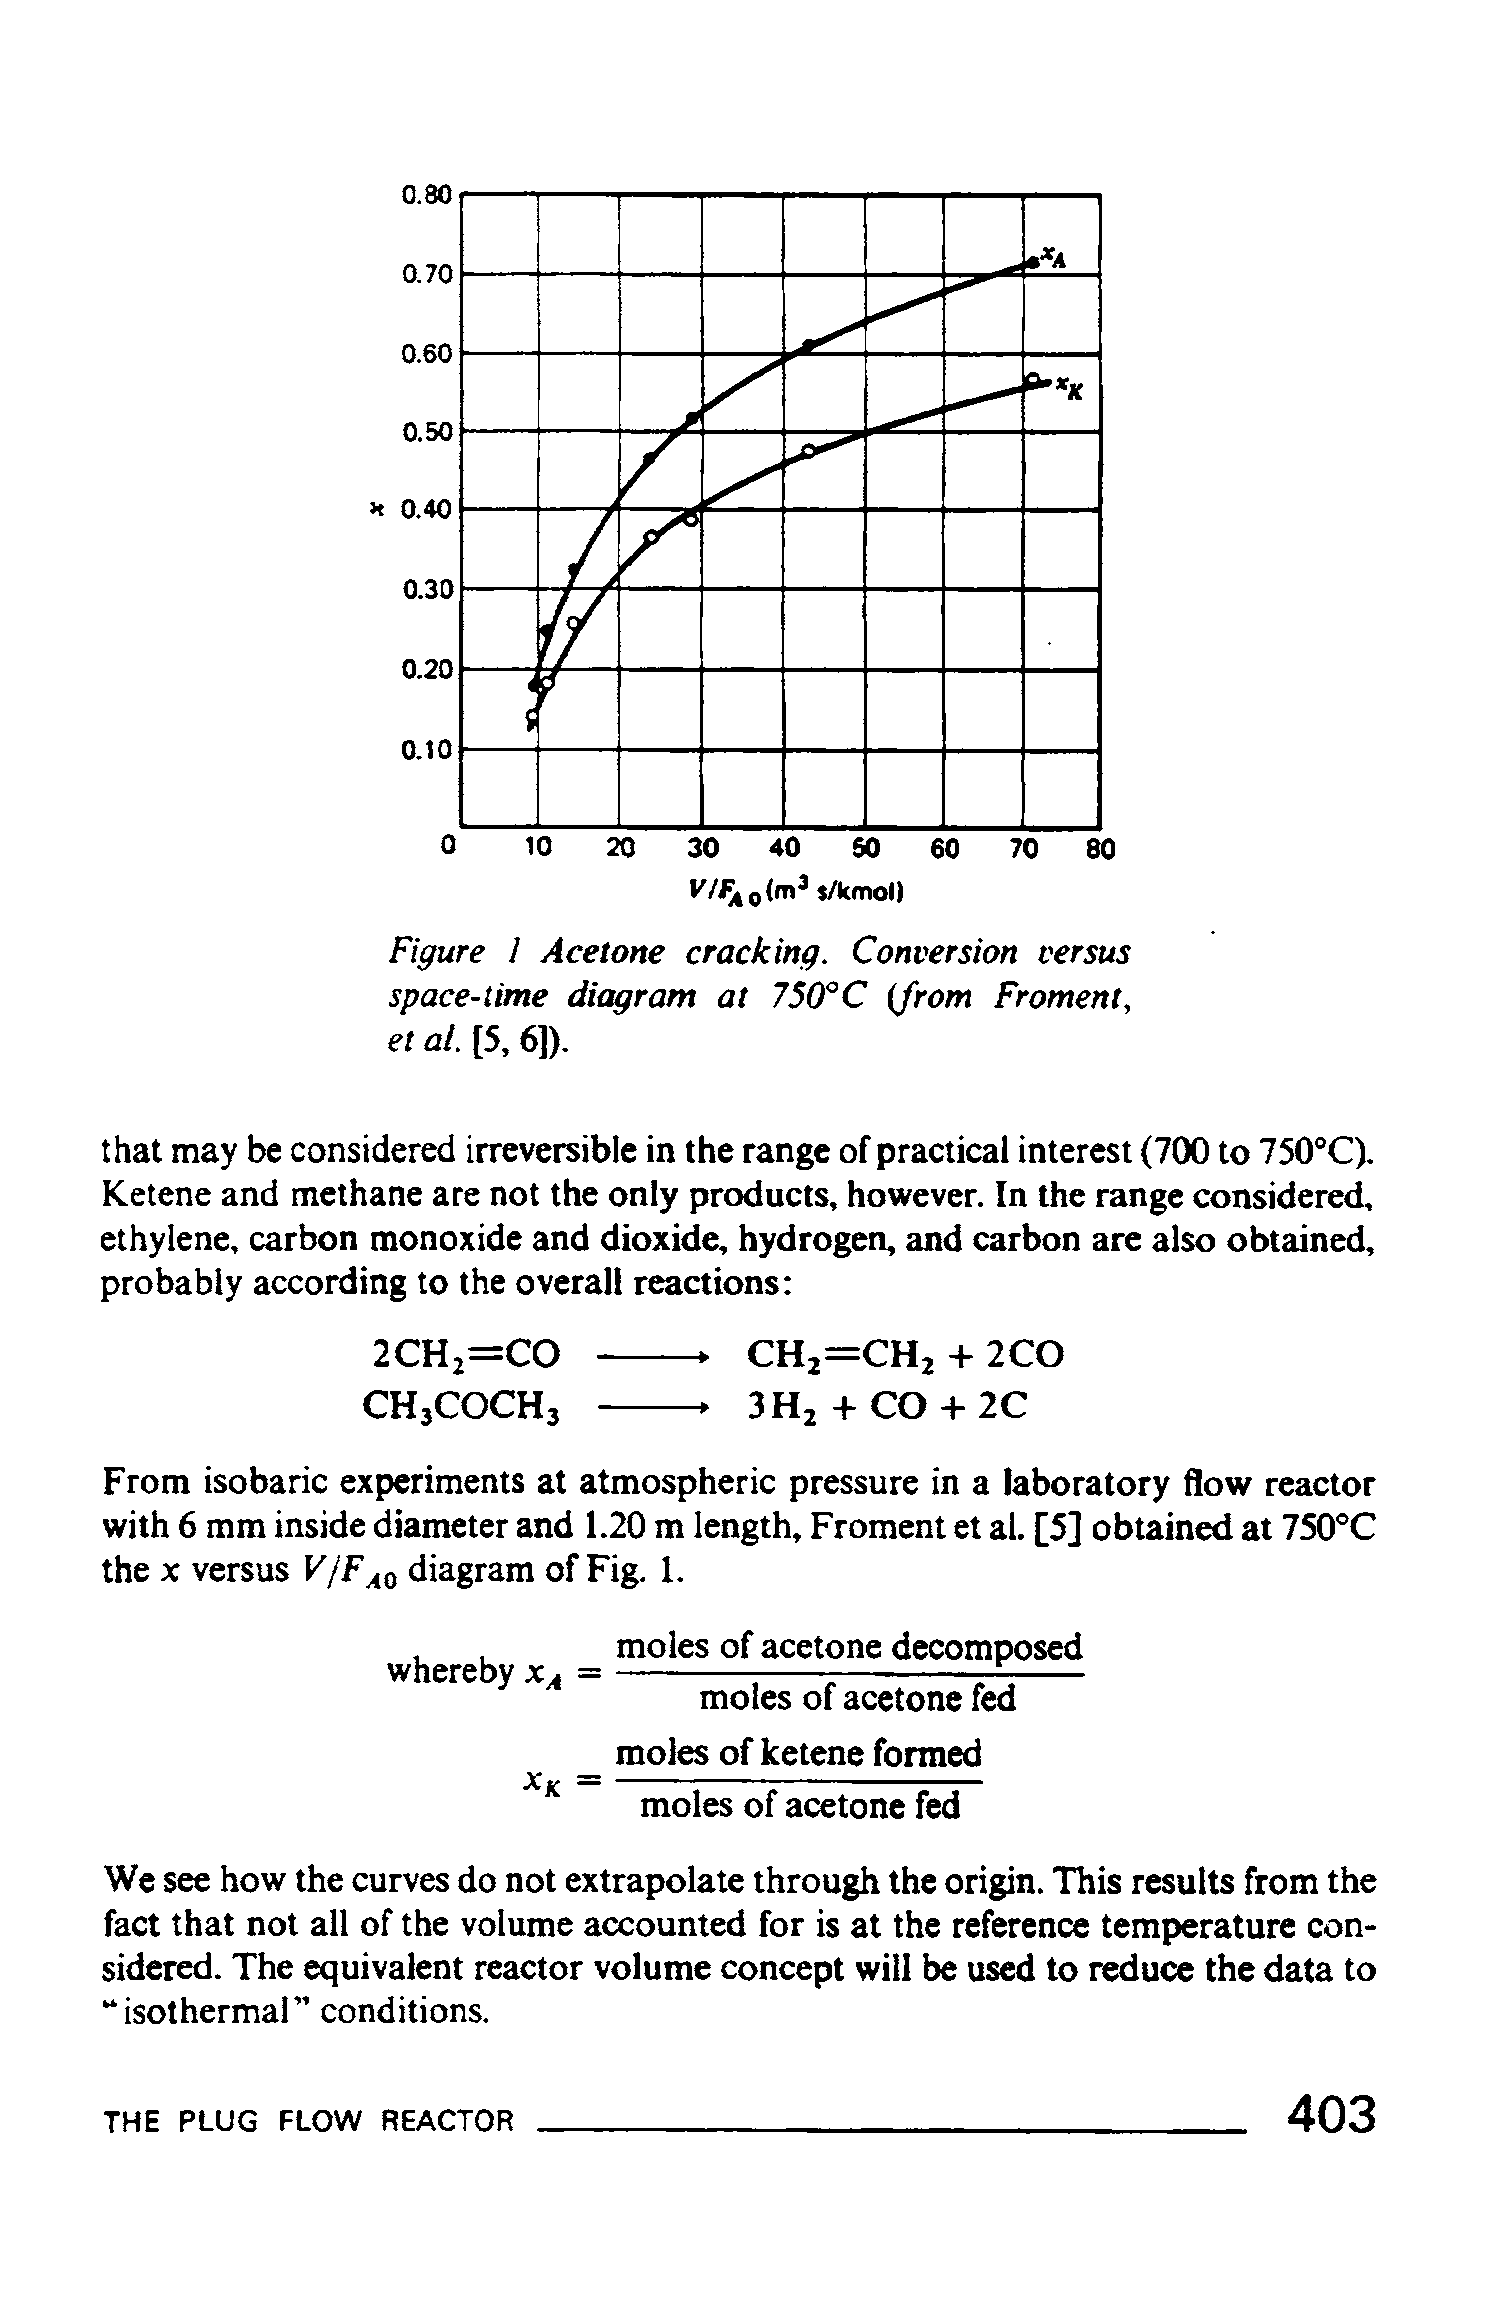 Figure / Acetone cracking. Conversion versus space-time diagram at 750°C (from Froment, era/. [5.6]).